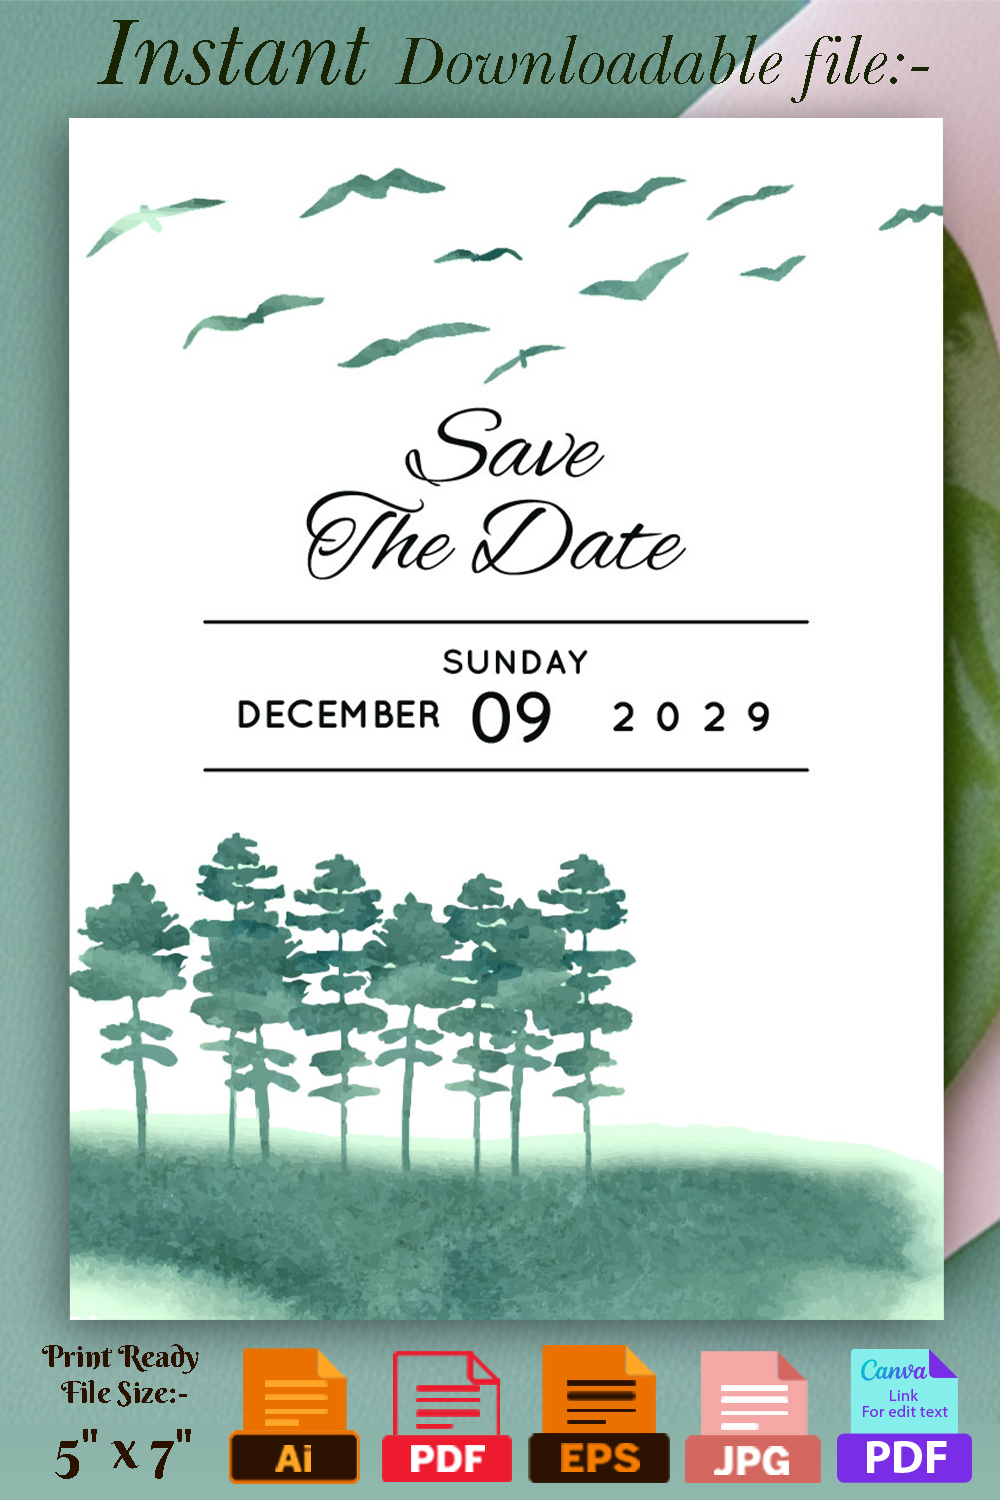 Winter Wedding Card with Mountains and Fir-tree Pinterest.